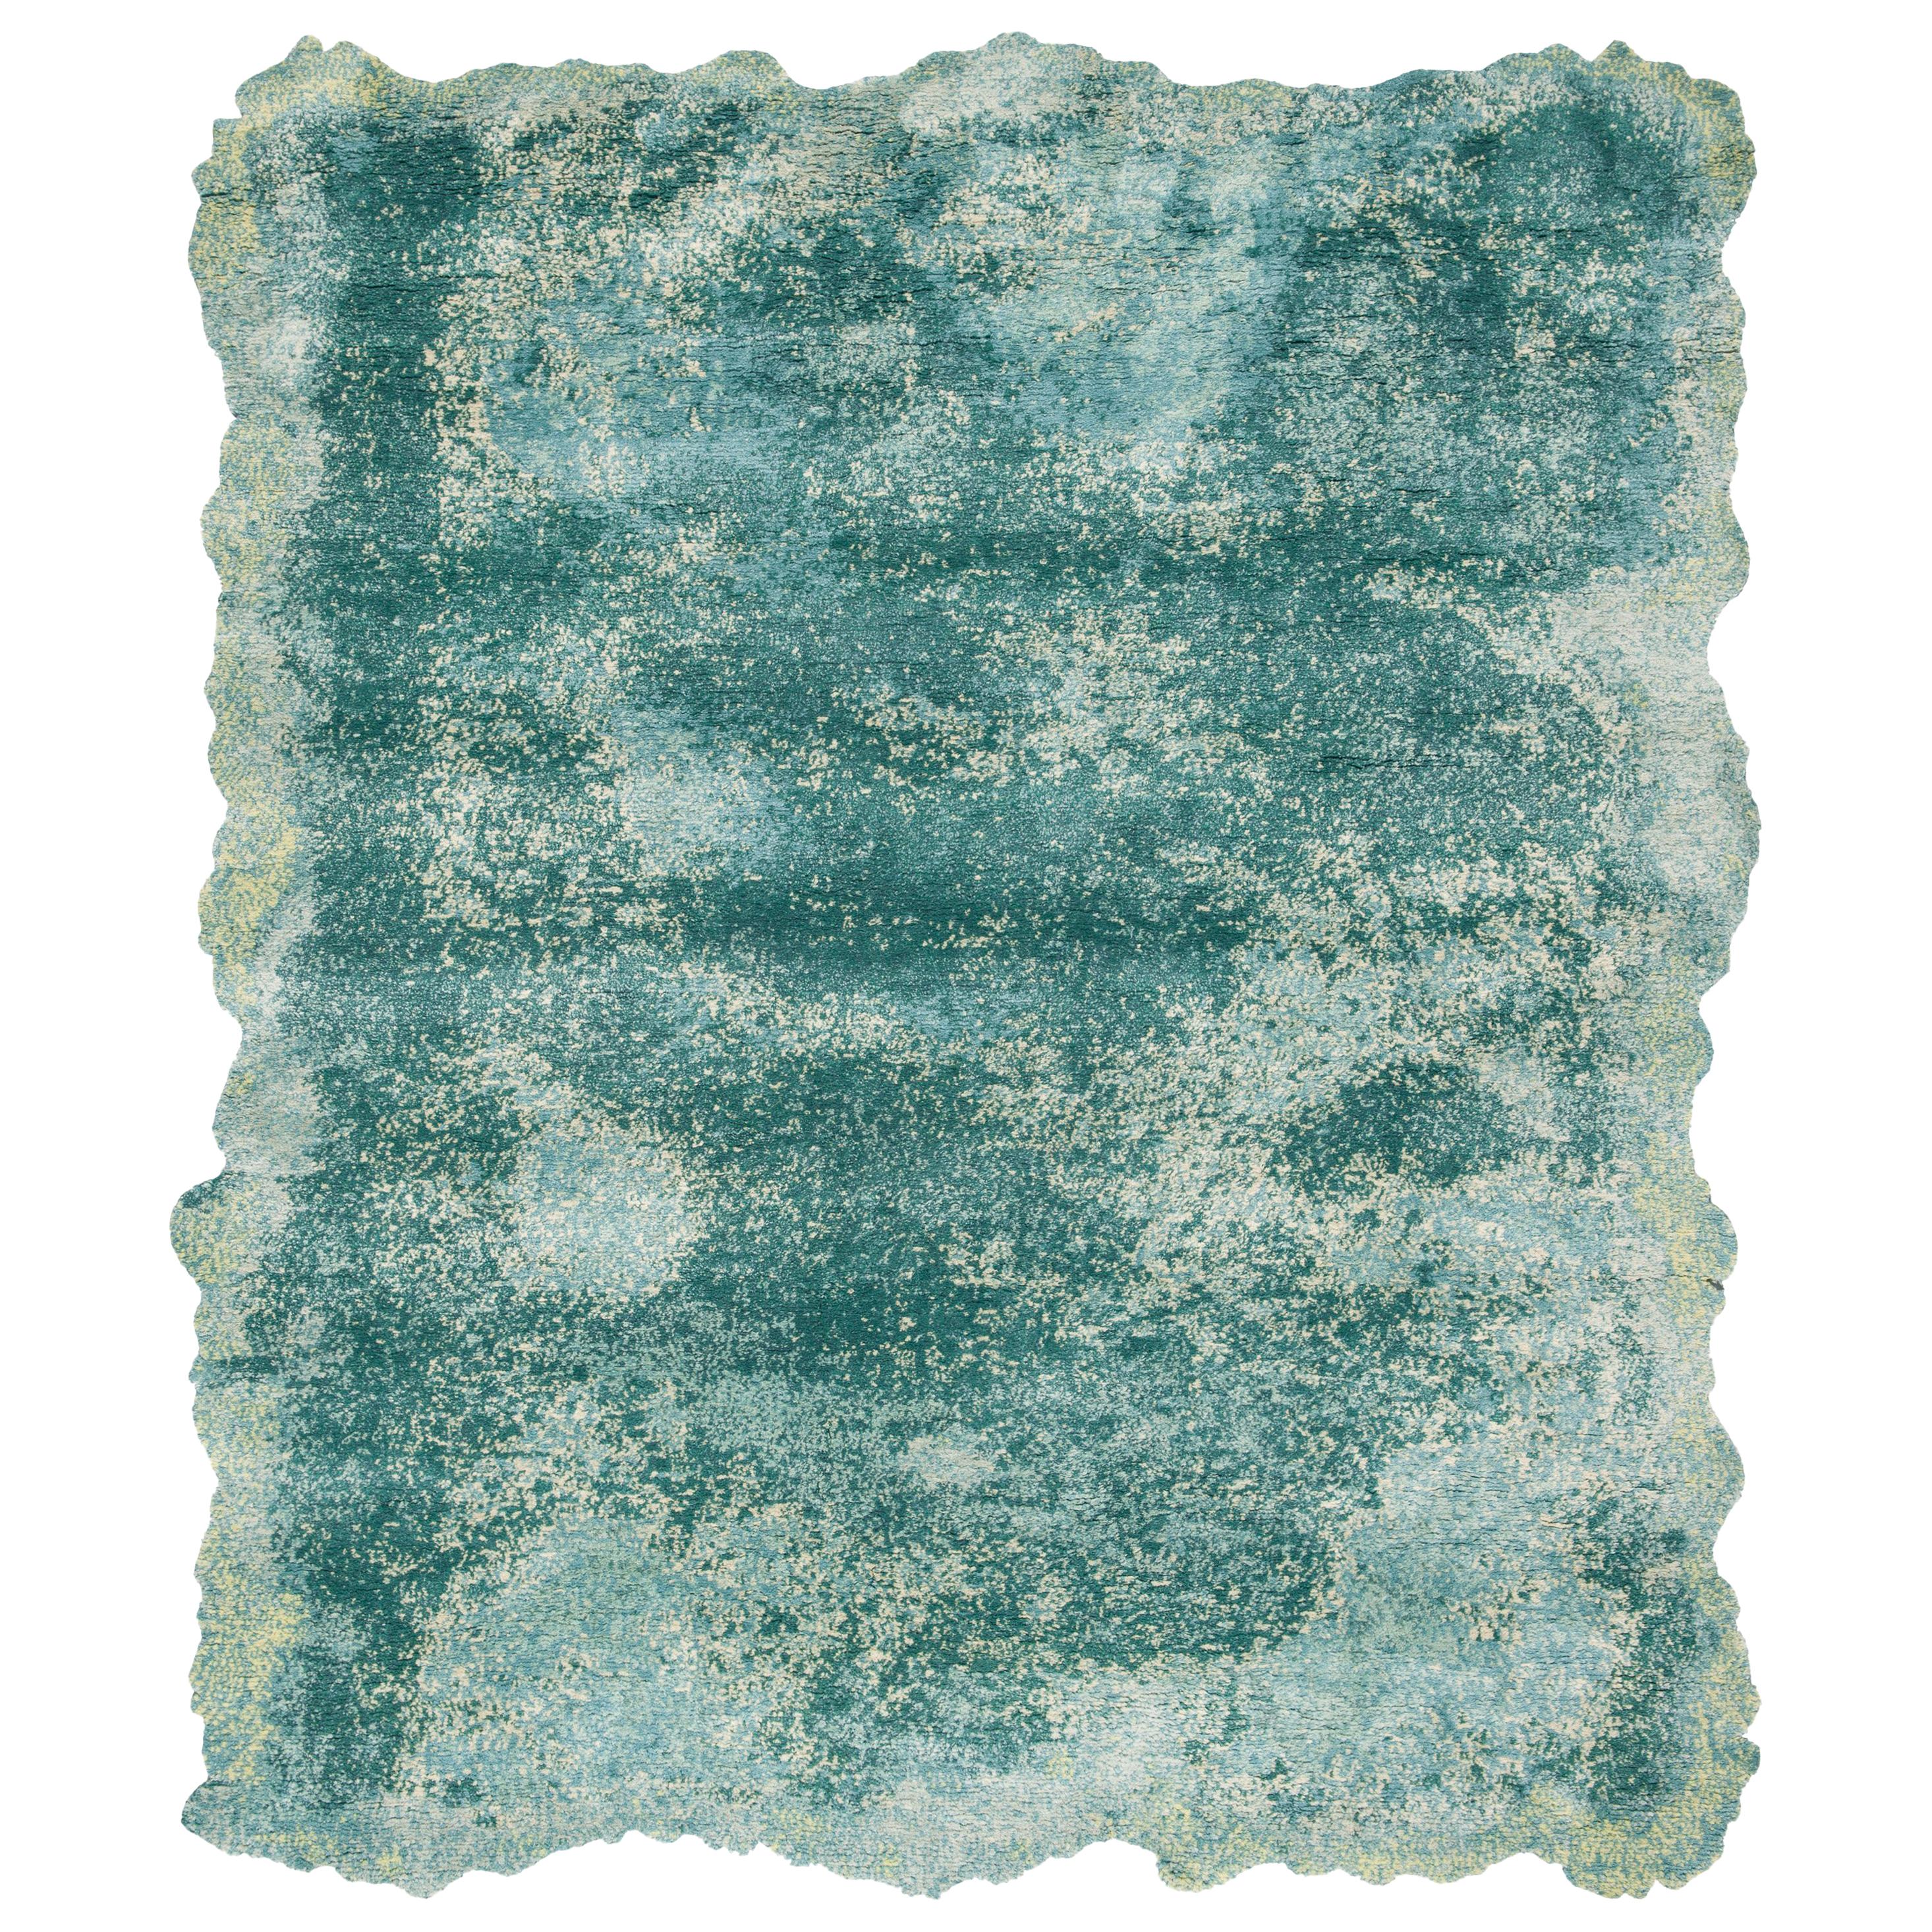 Riot - Wool Silk Blend High Pile Hand Knotted Carpet Rug by Jan Kath